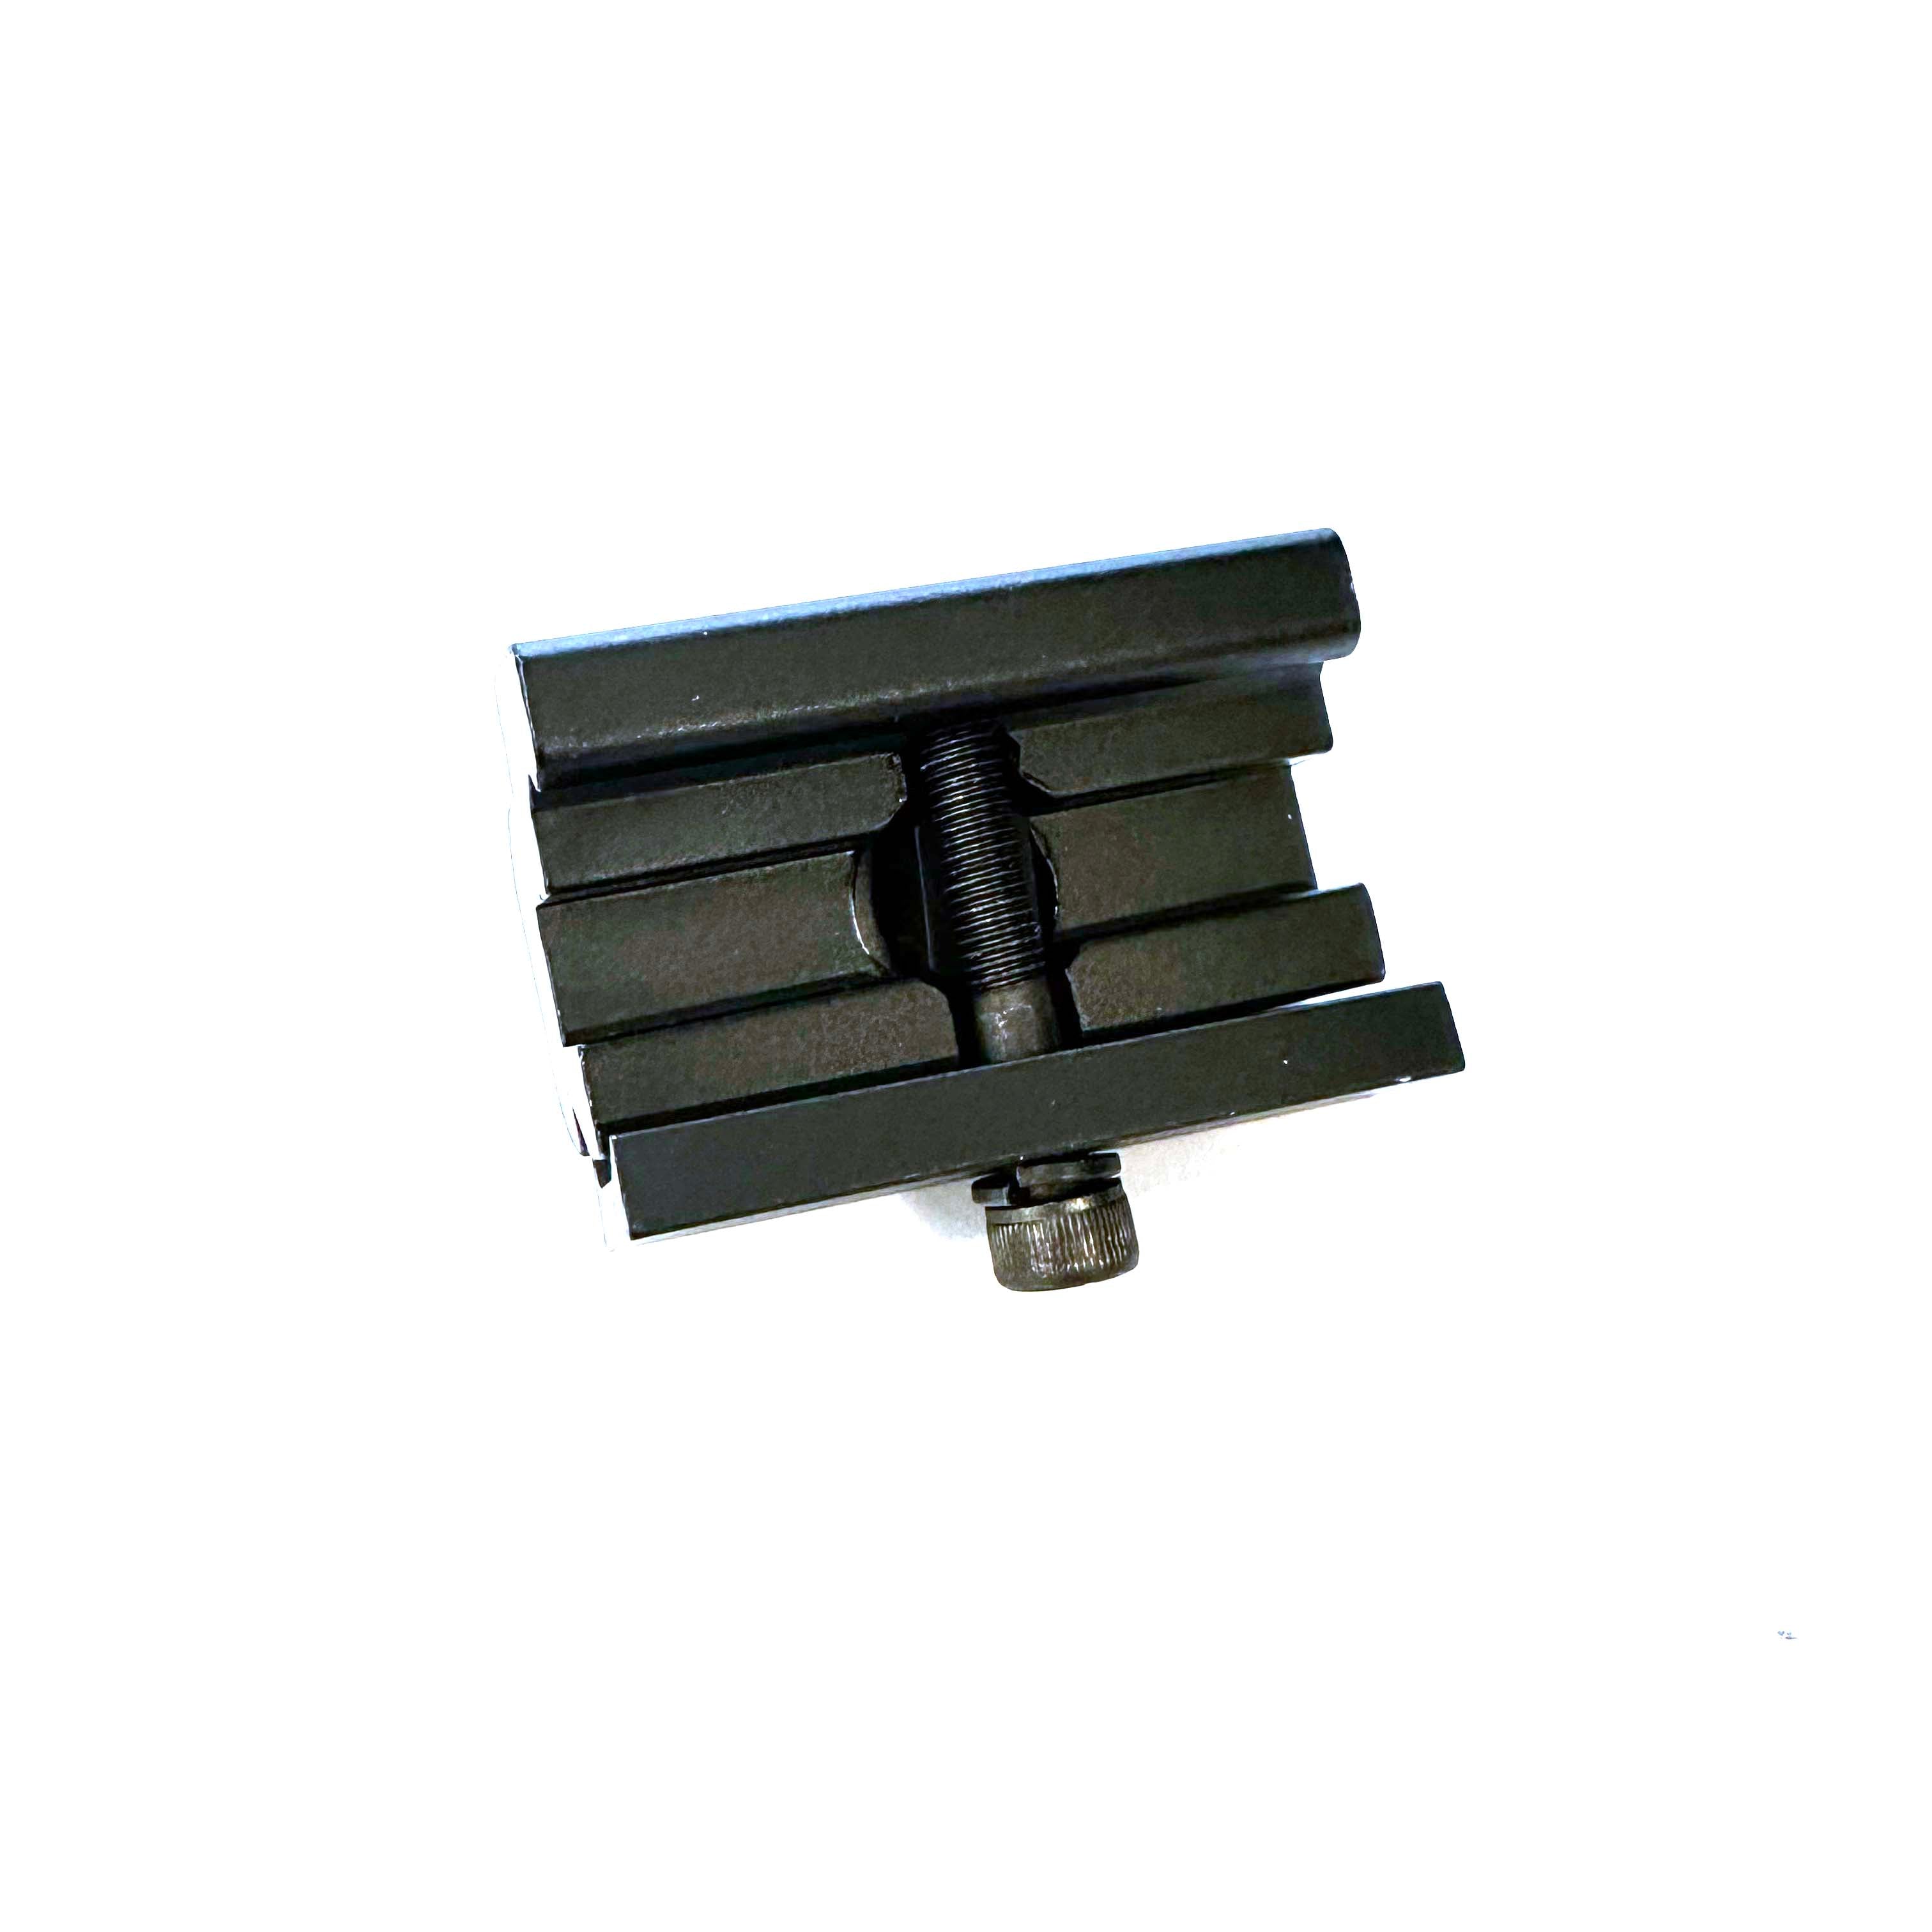 Bipod Stud Adapter to fit Picatinny Rails - NEW - RPI Supplies